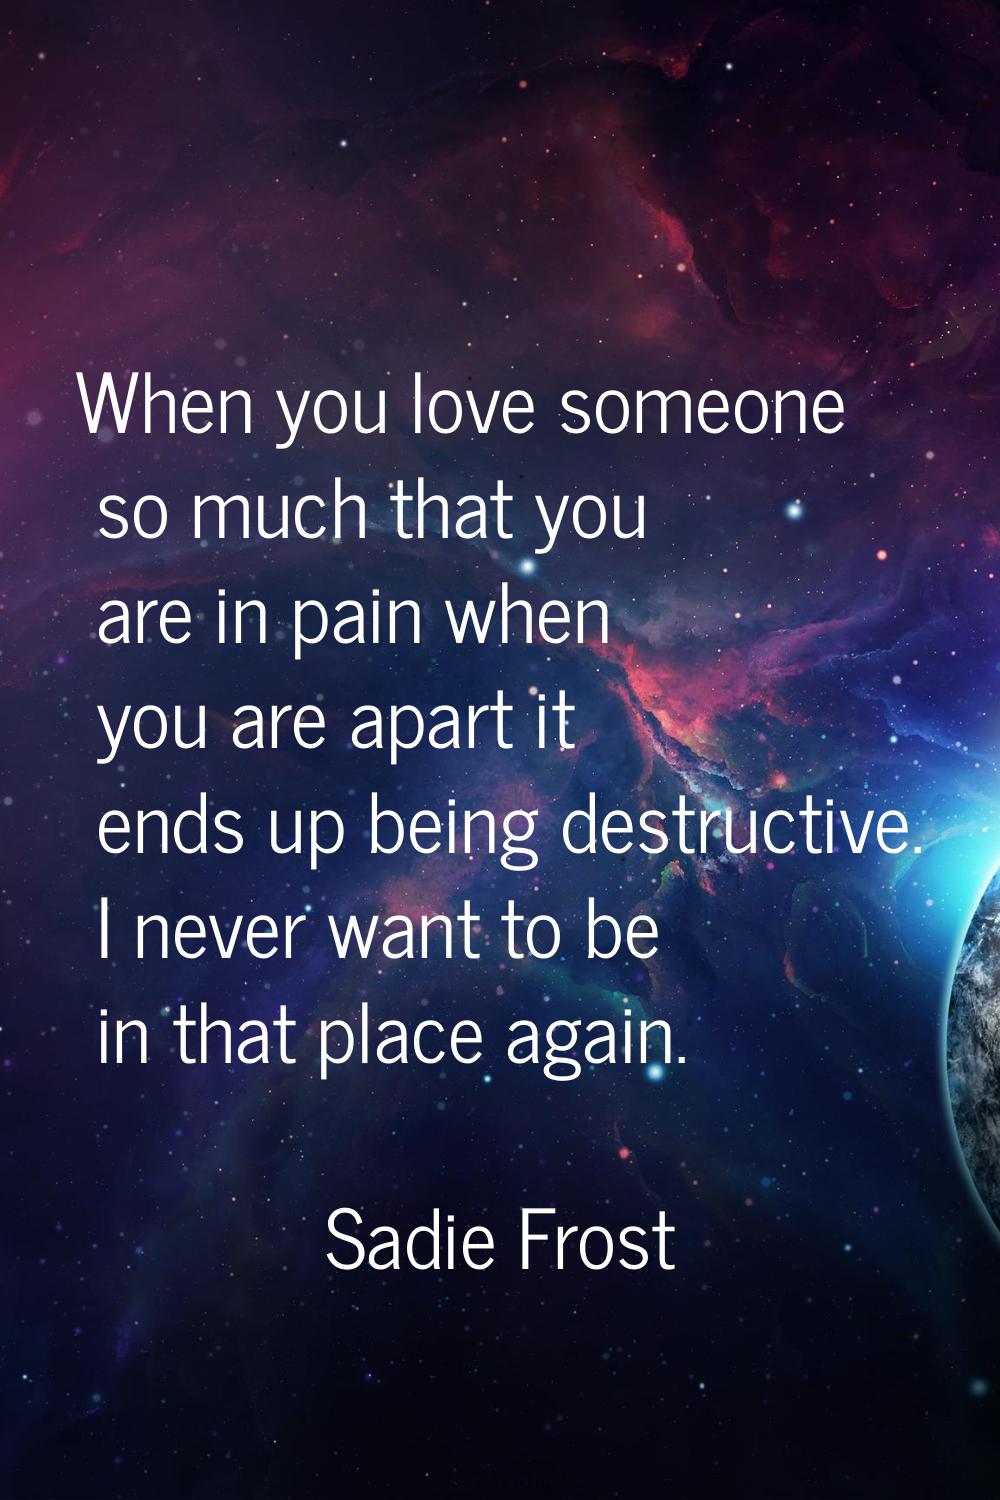 When you love someone so much that you are in pain when you are apart it ends up being destructive.